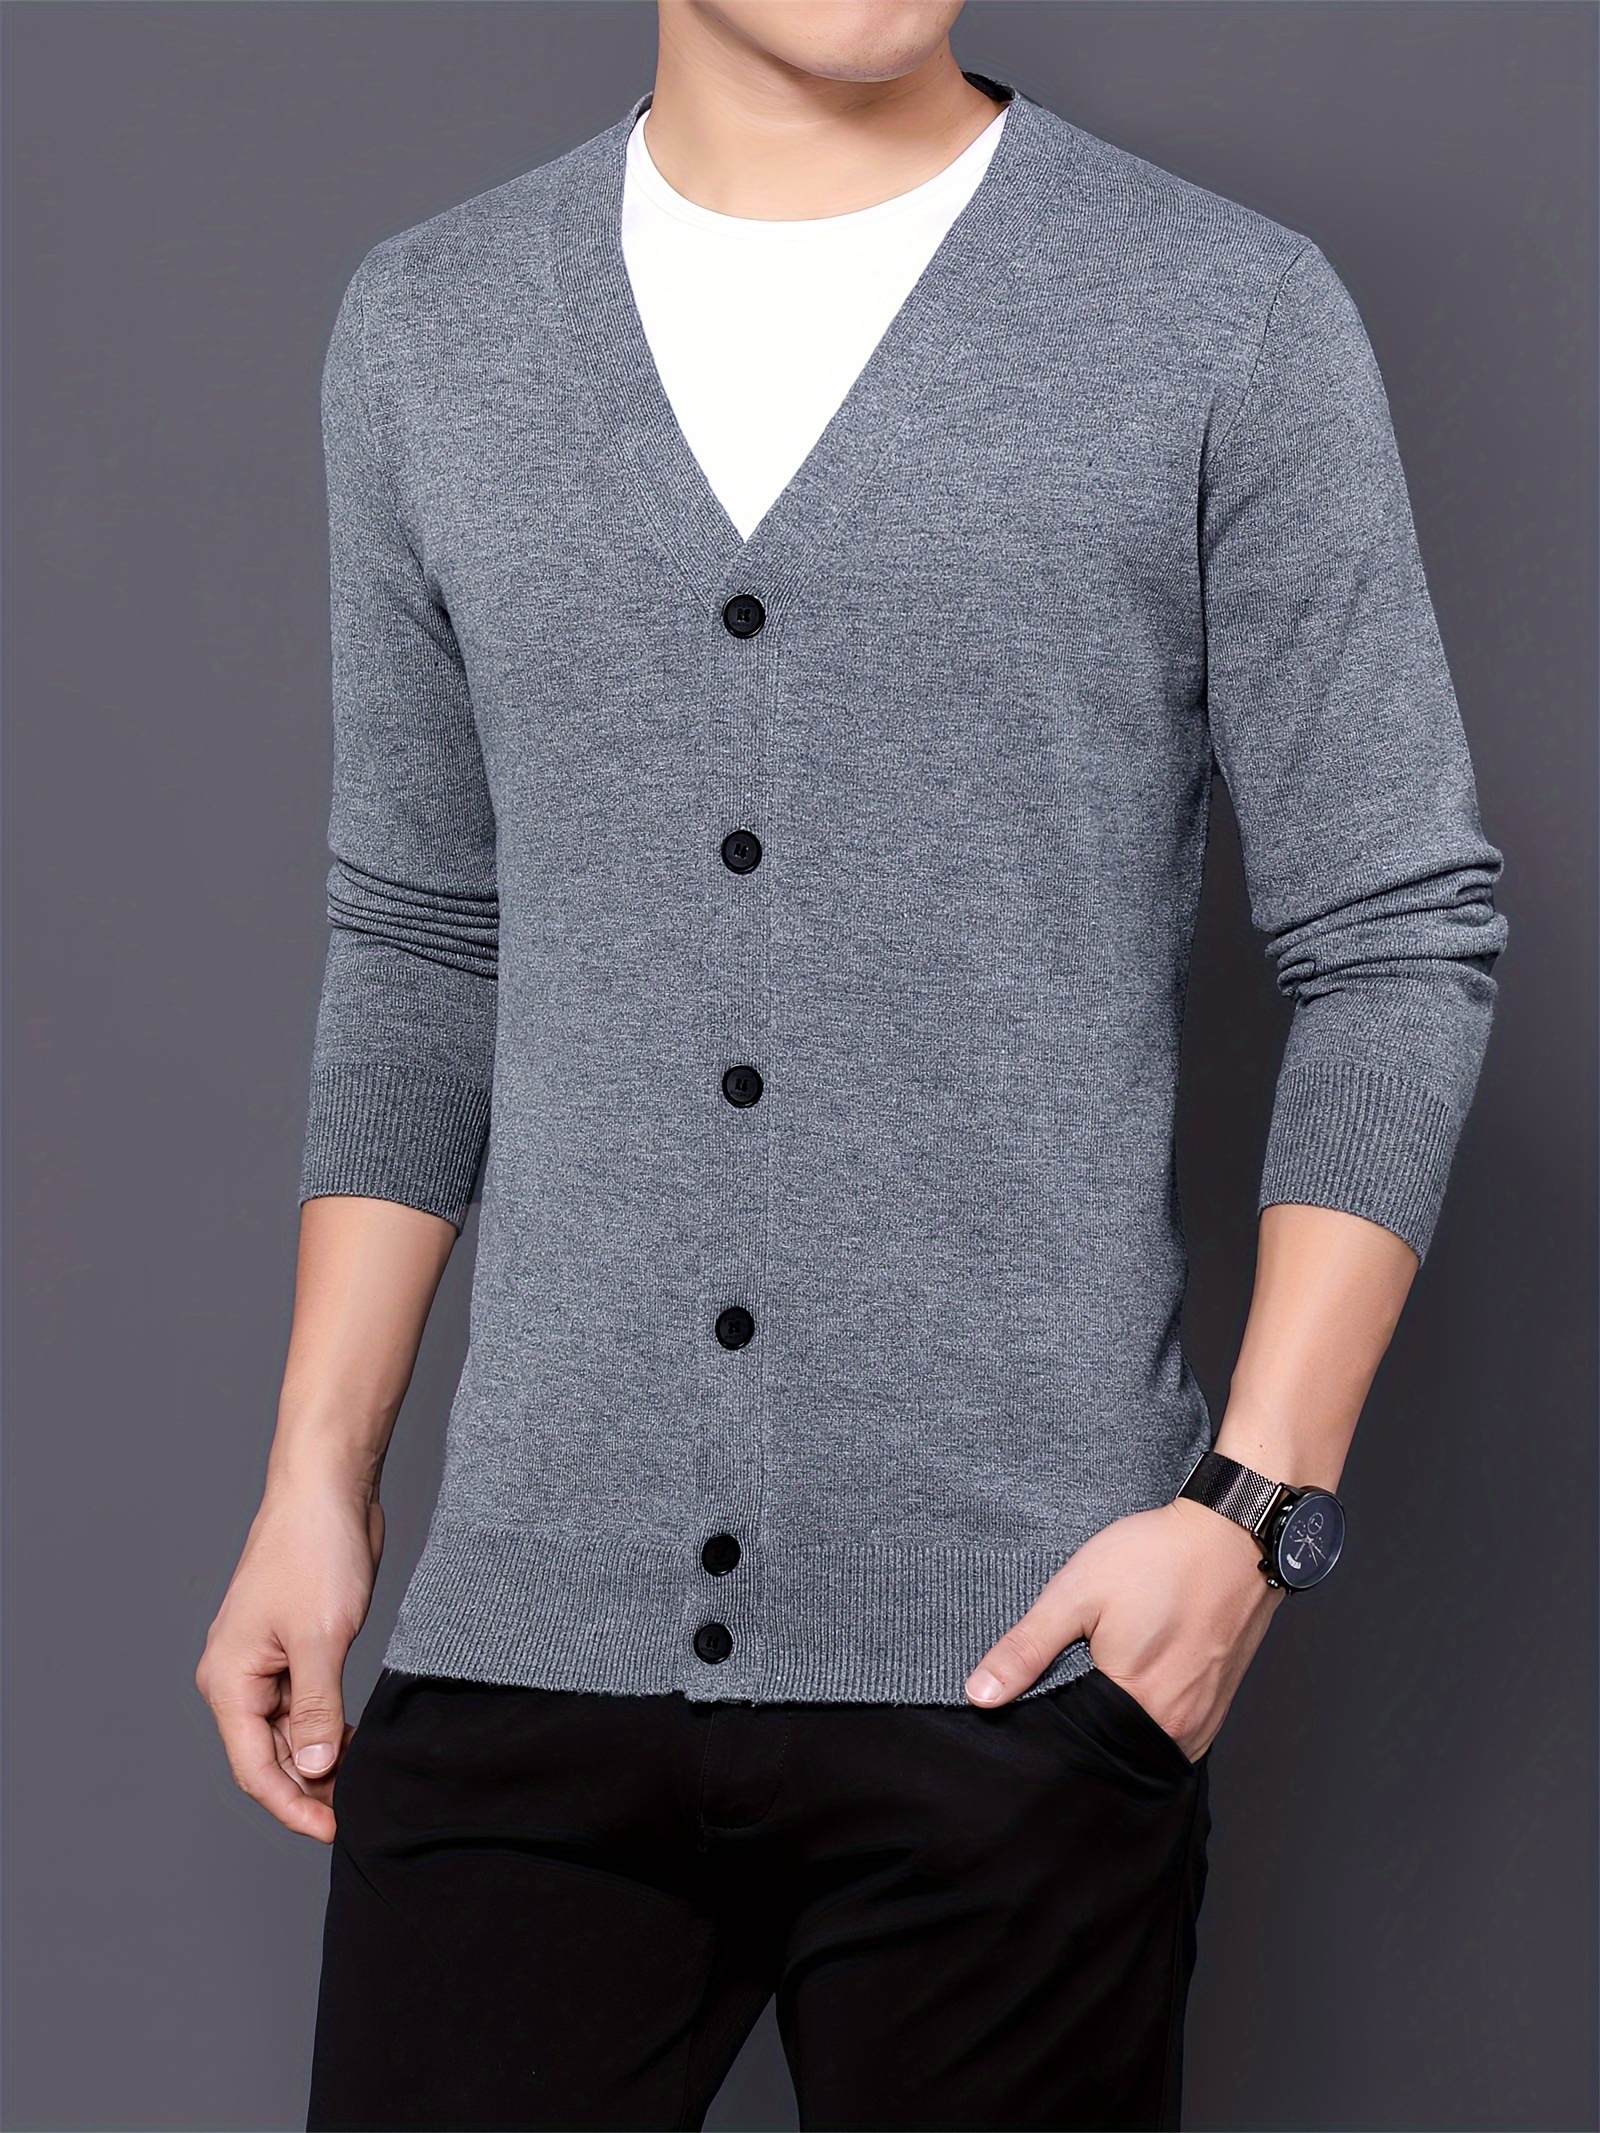 Men's Knitted Vest - Business Casual Button Cardigan Grey Knitted